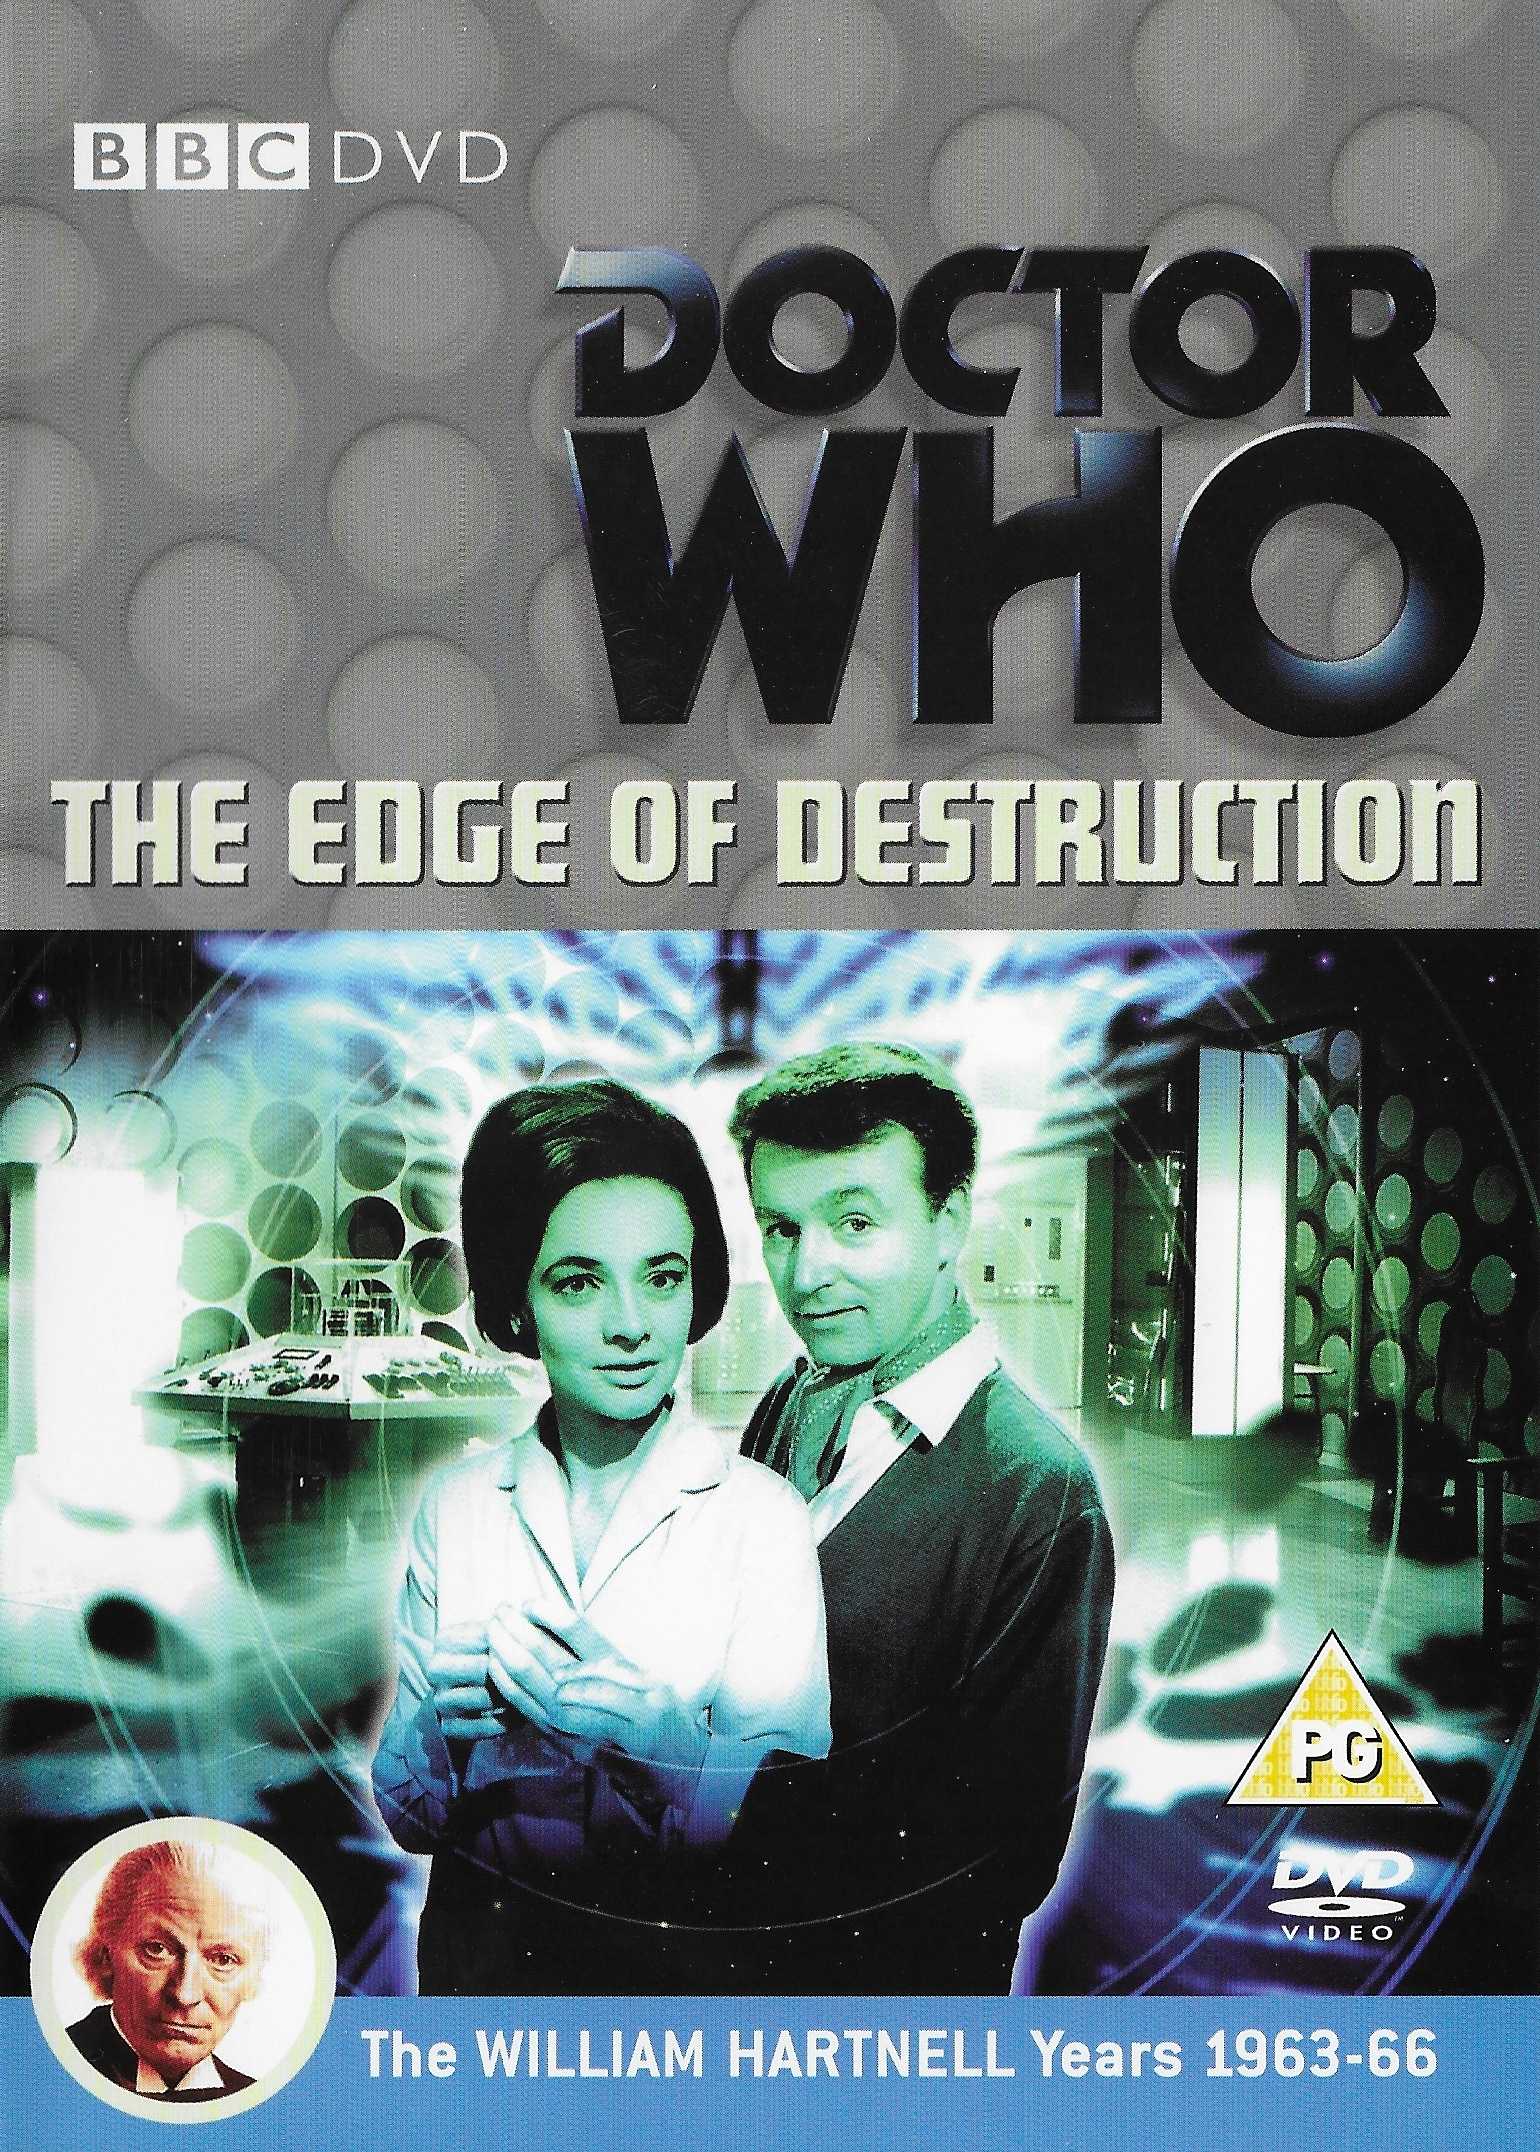 Picture of BBCDVD 1882C Doctor Who - The edge of destruction by artist David Whitaker from the BBC dvds - Records and Tapes library